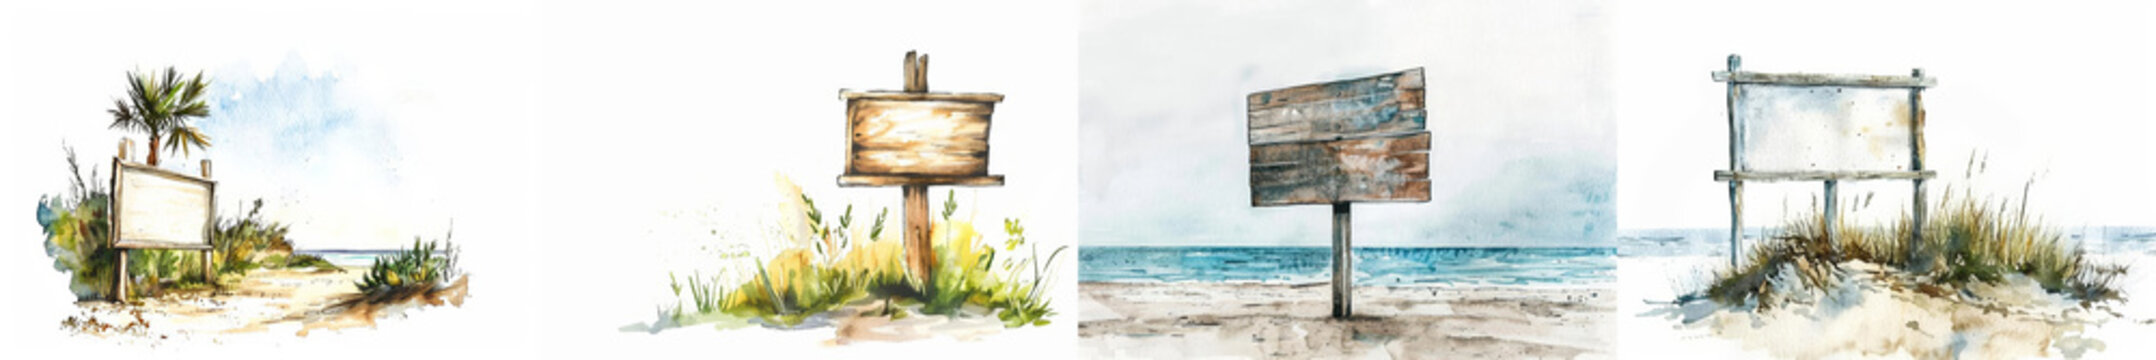 Four separate watercolor paintings depicting various wooden signposts in a beach setting, with space for text, ideal for summer-themed designs and vacation concepts